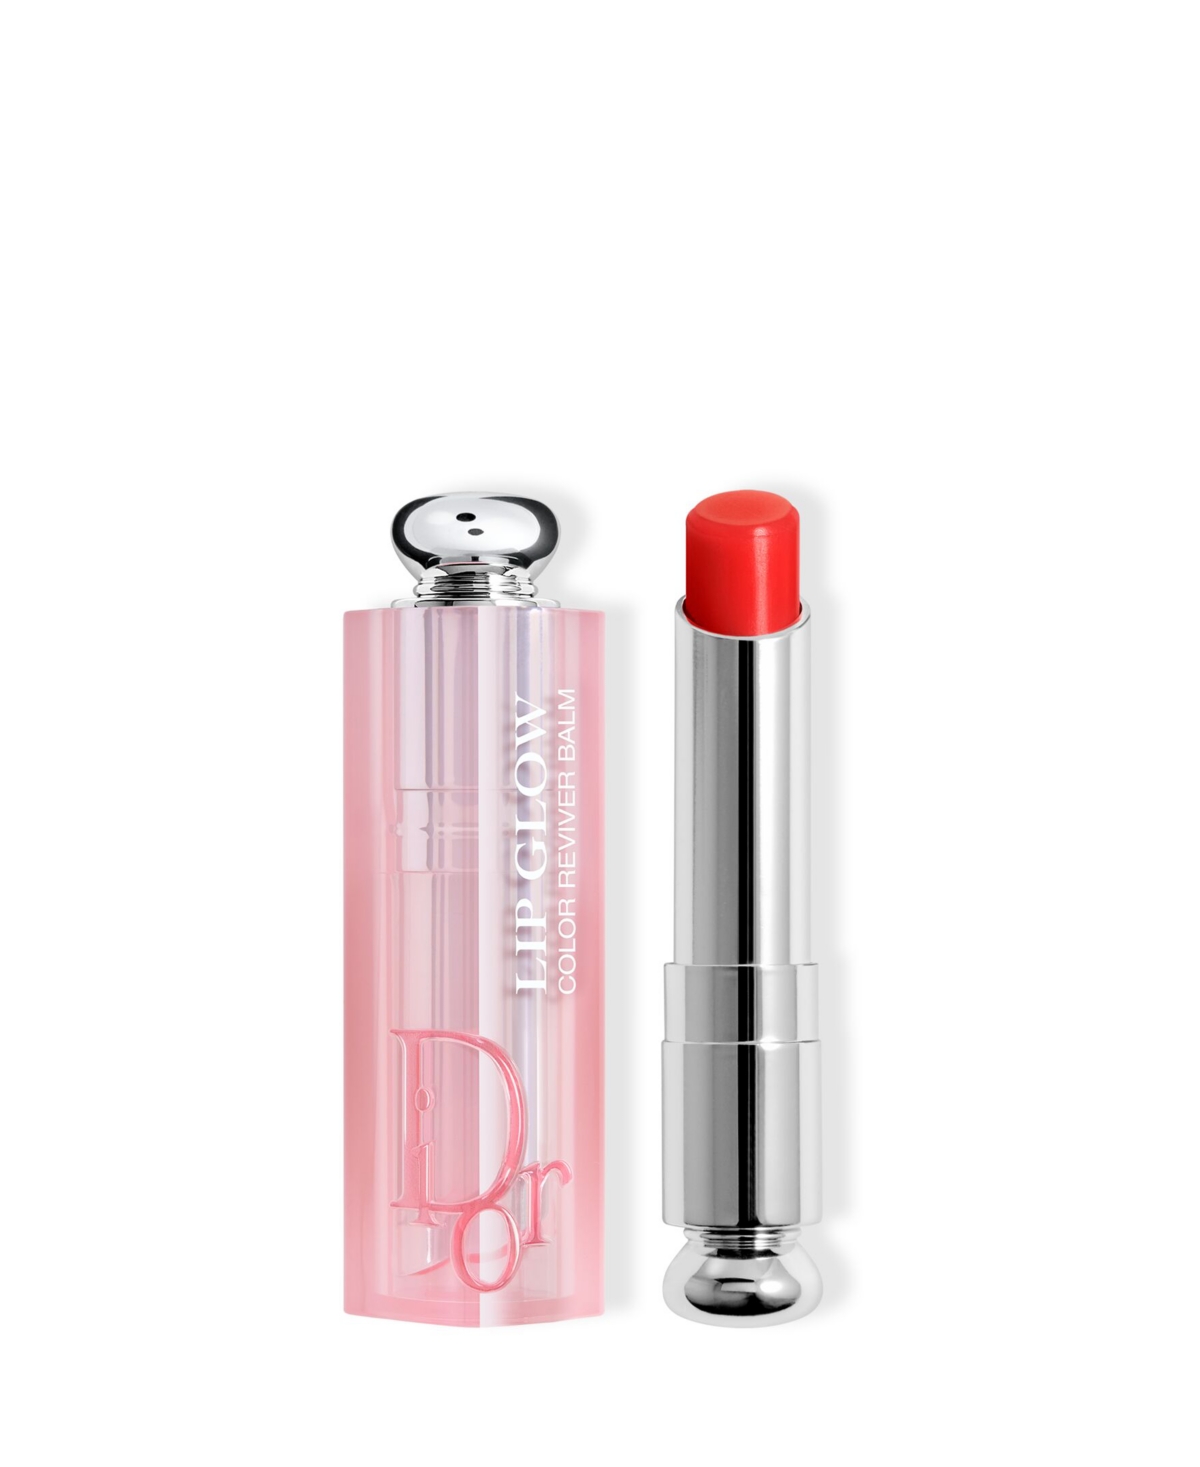 Dior Addict Lip Glow Balm In Glow  Cherry (a Delectable Red)